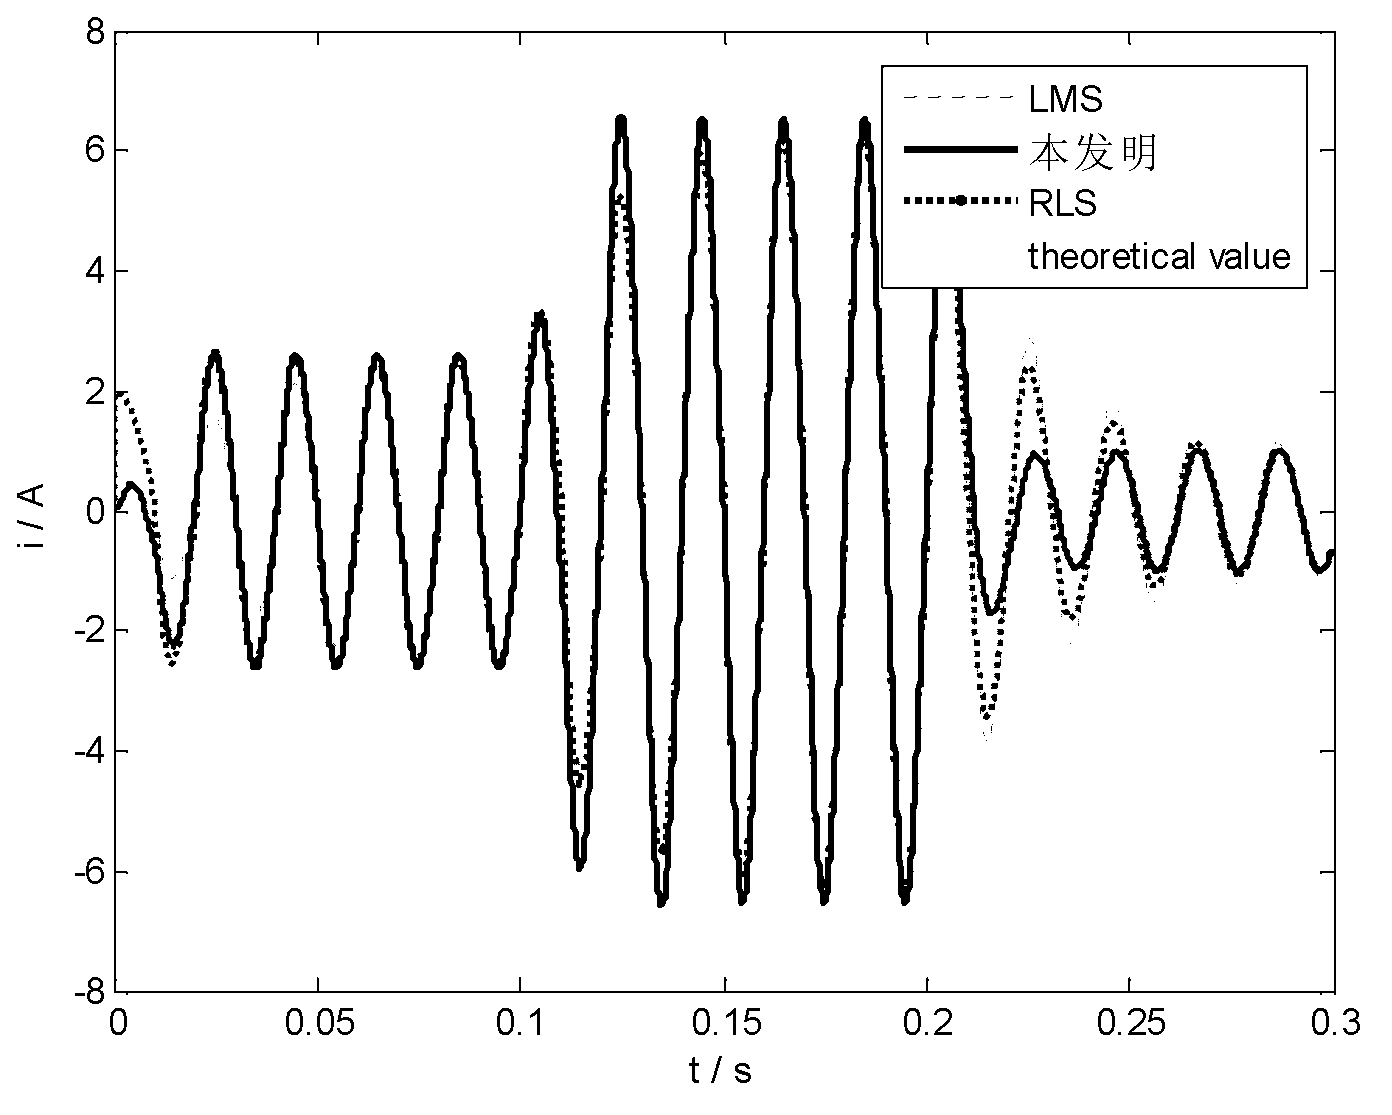 Weighting least mean square (LMS) detection method for harmonic currents